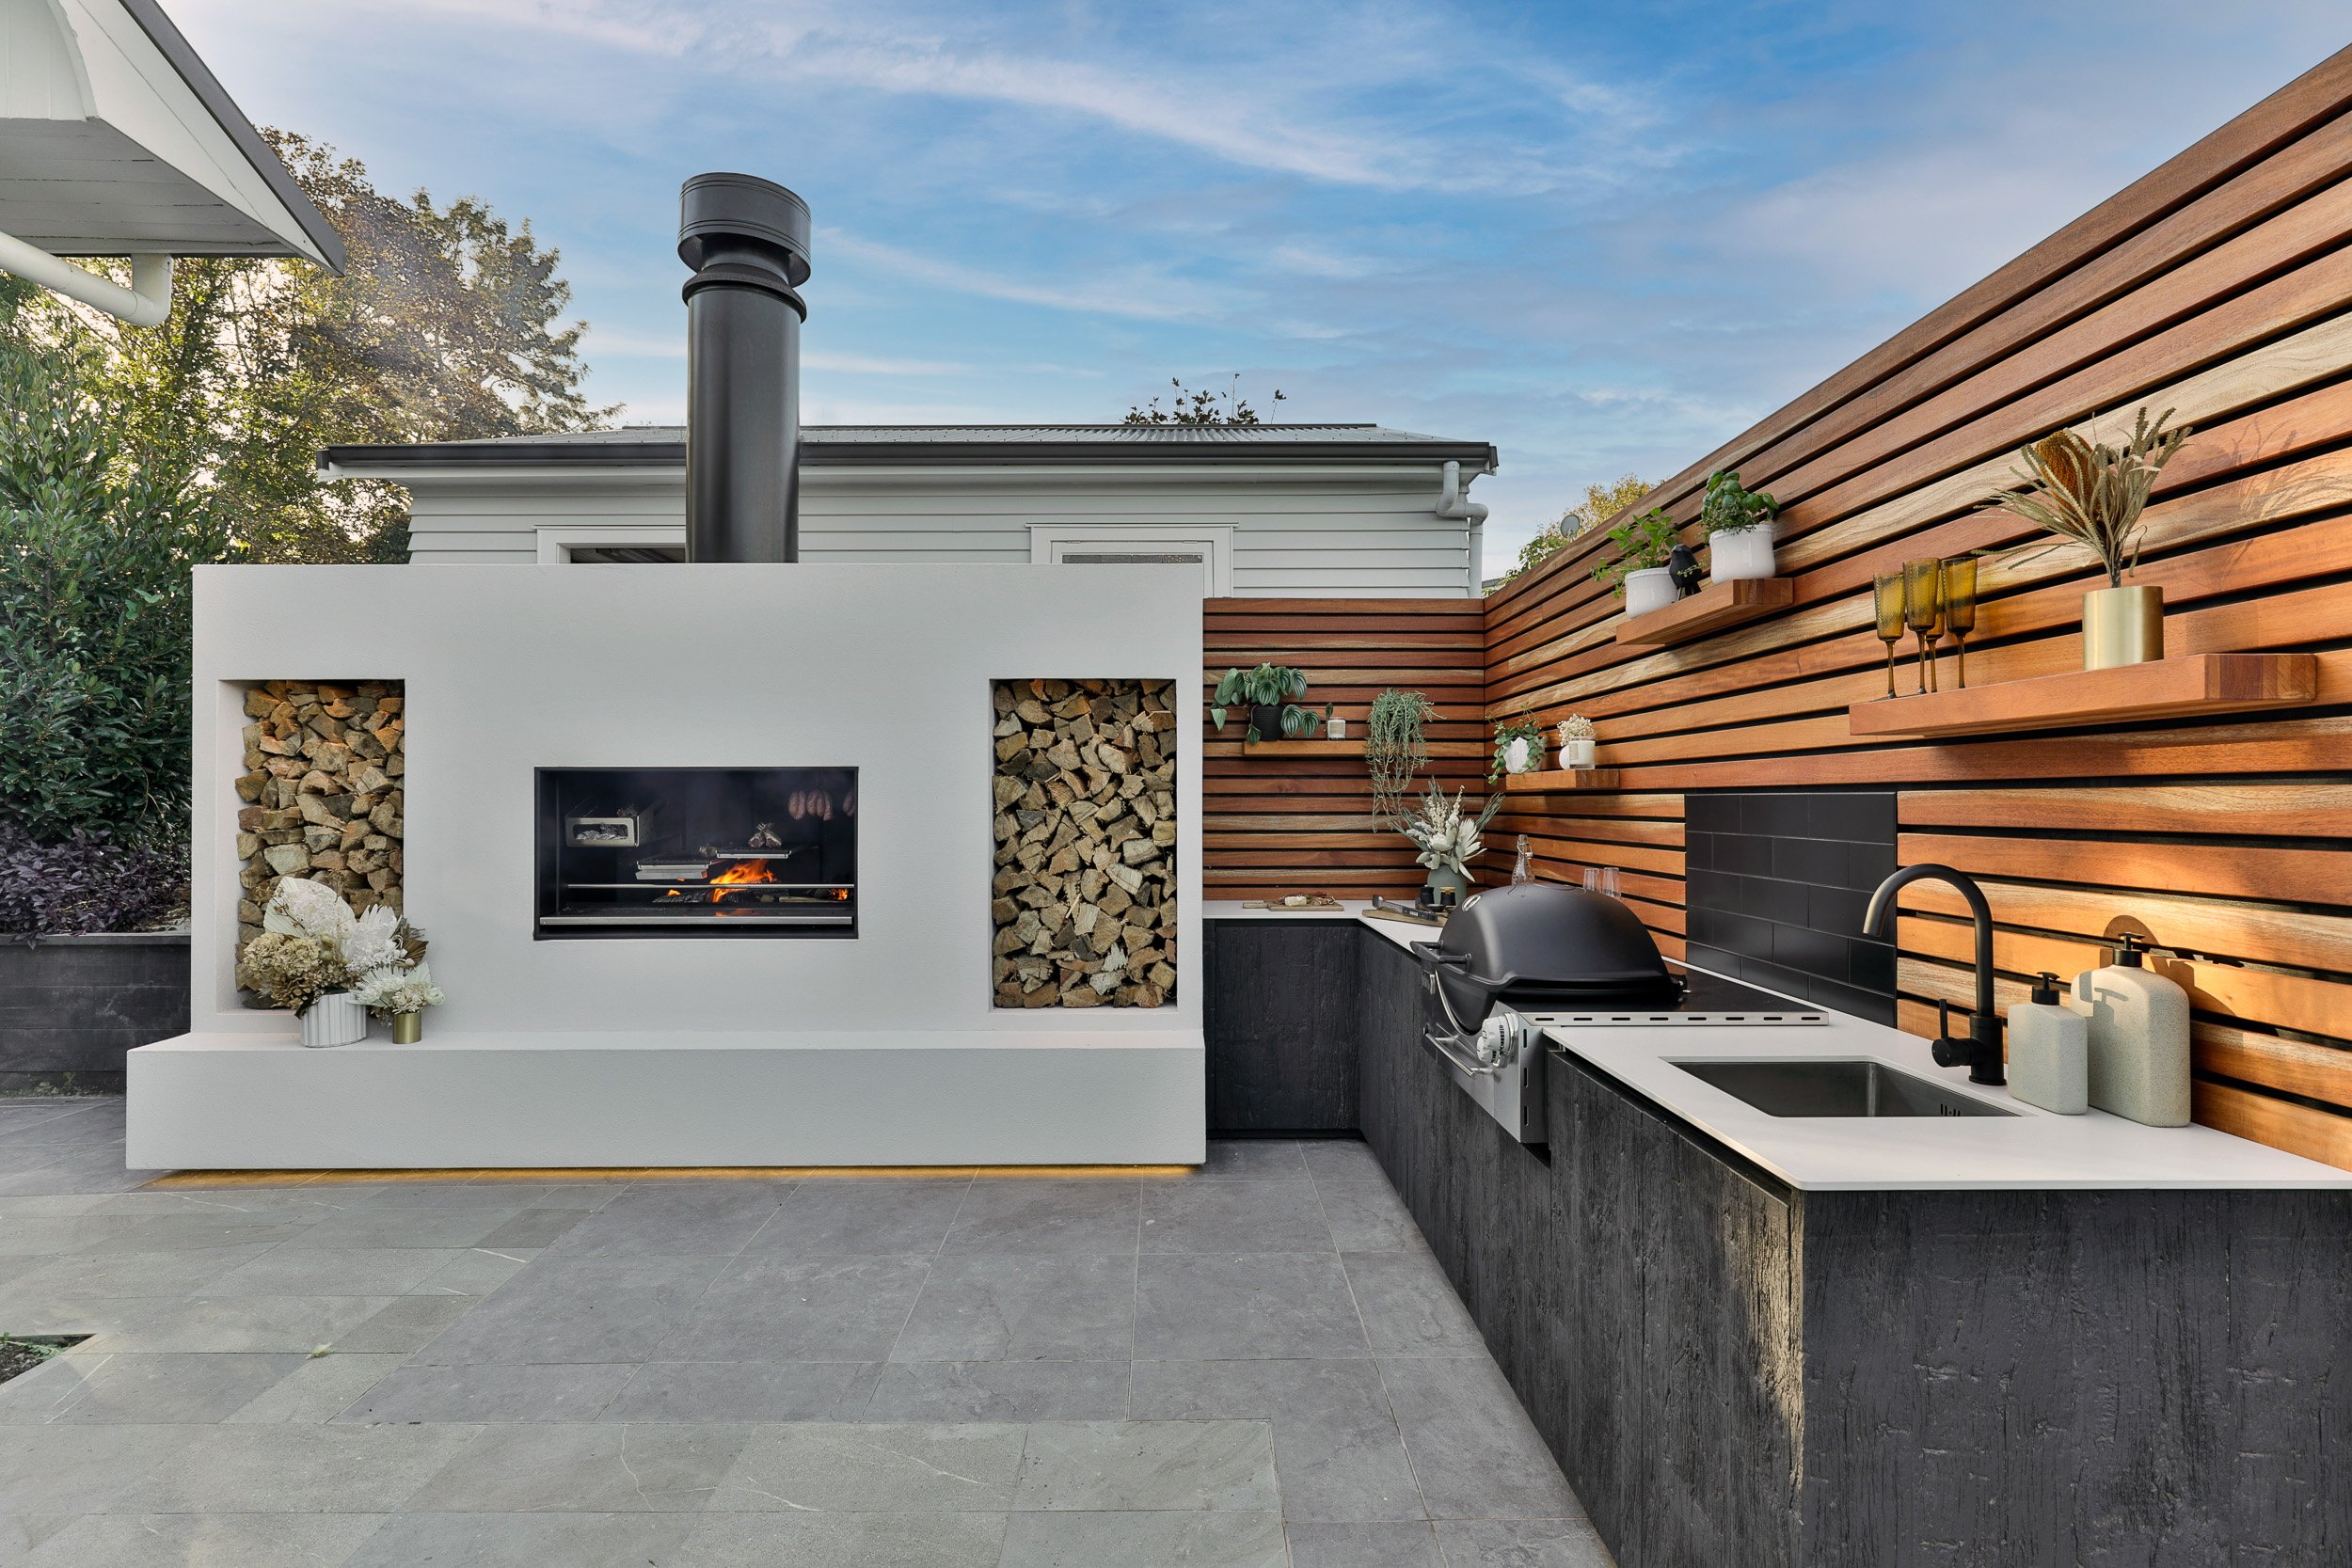 How to create an outdoor fireplace kitchen